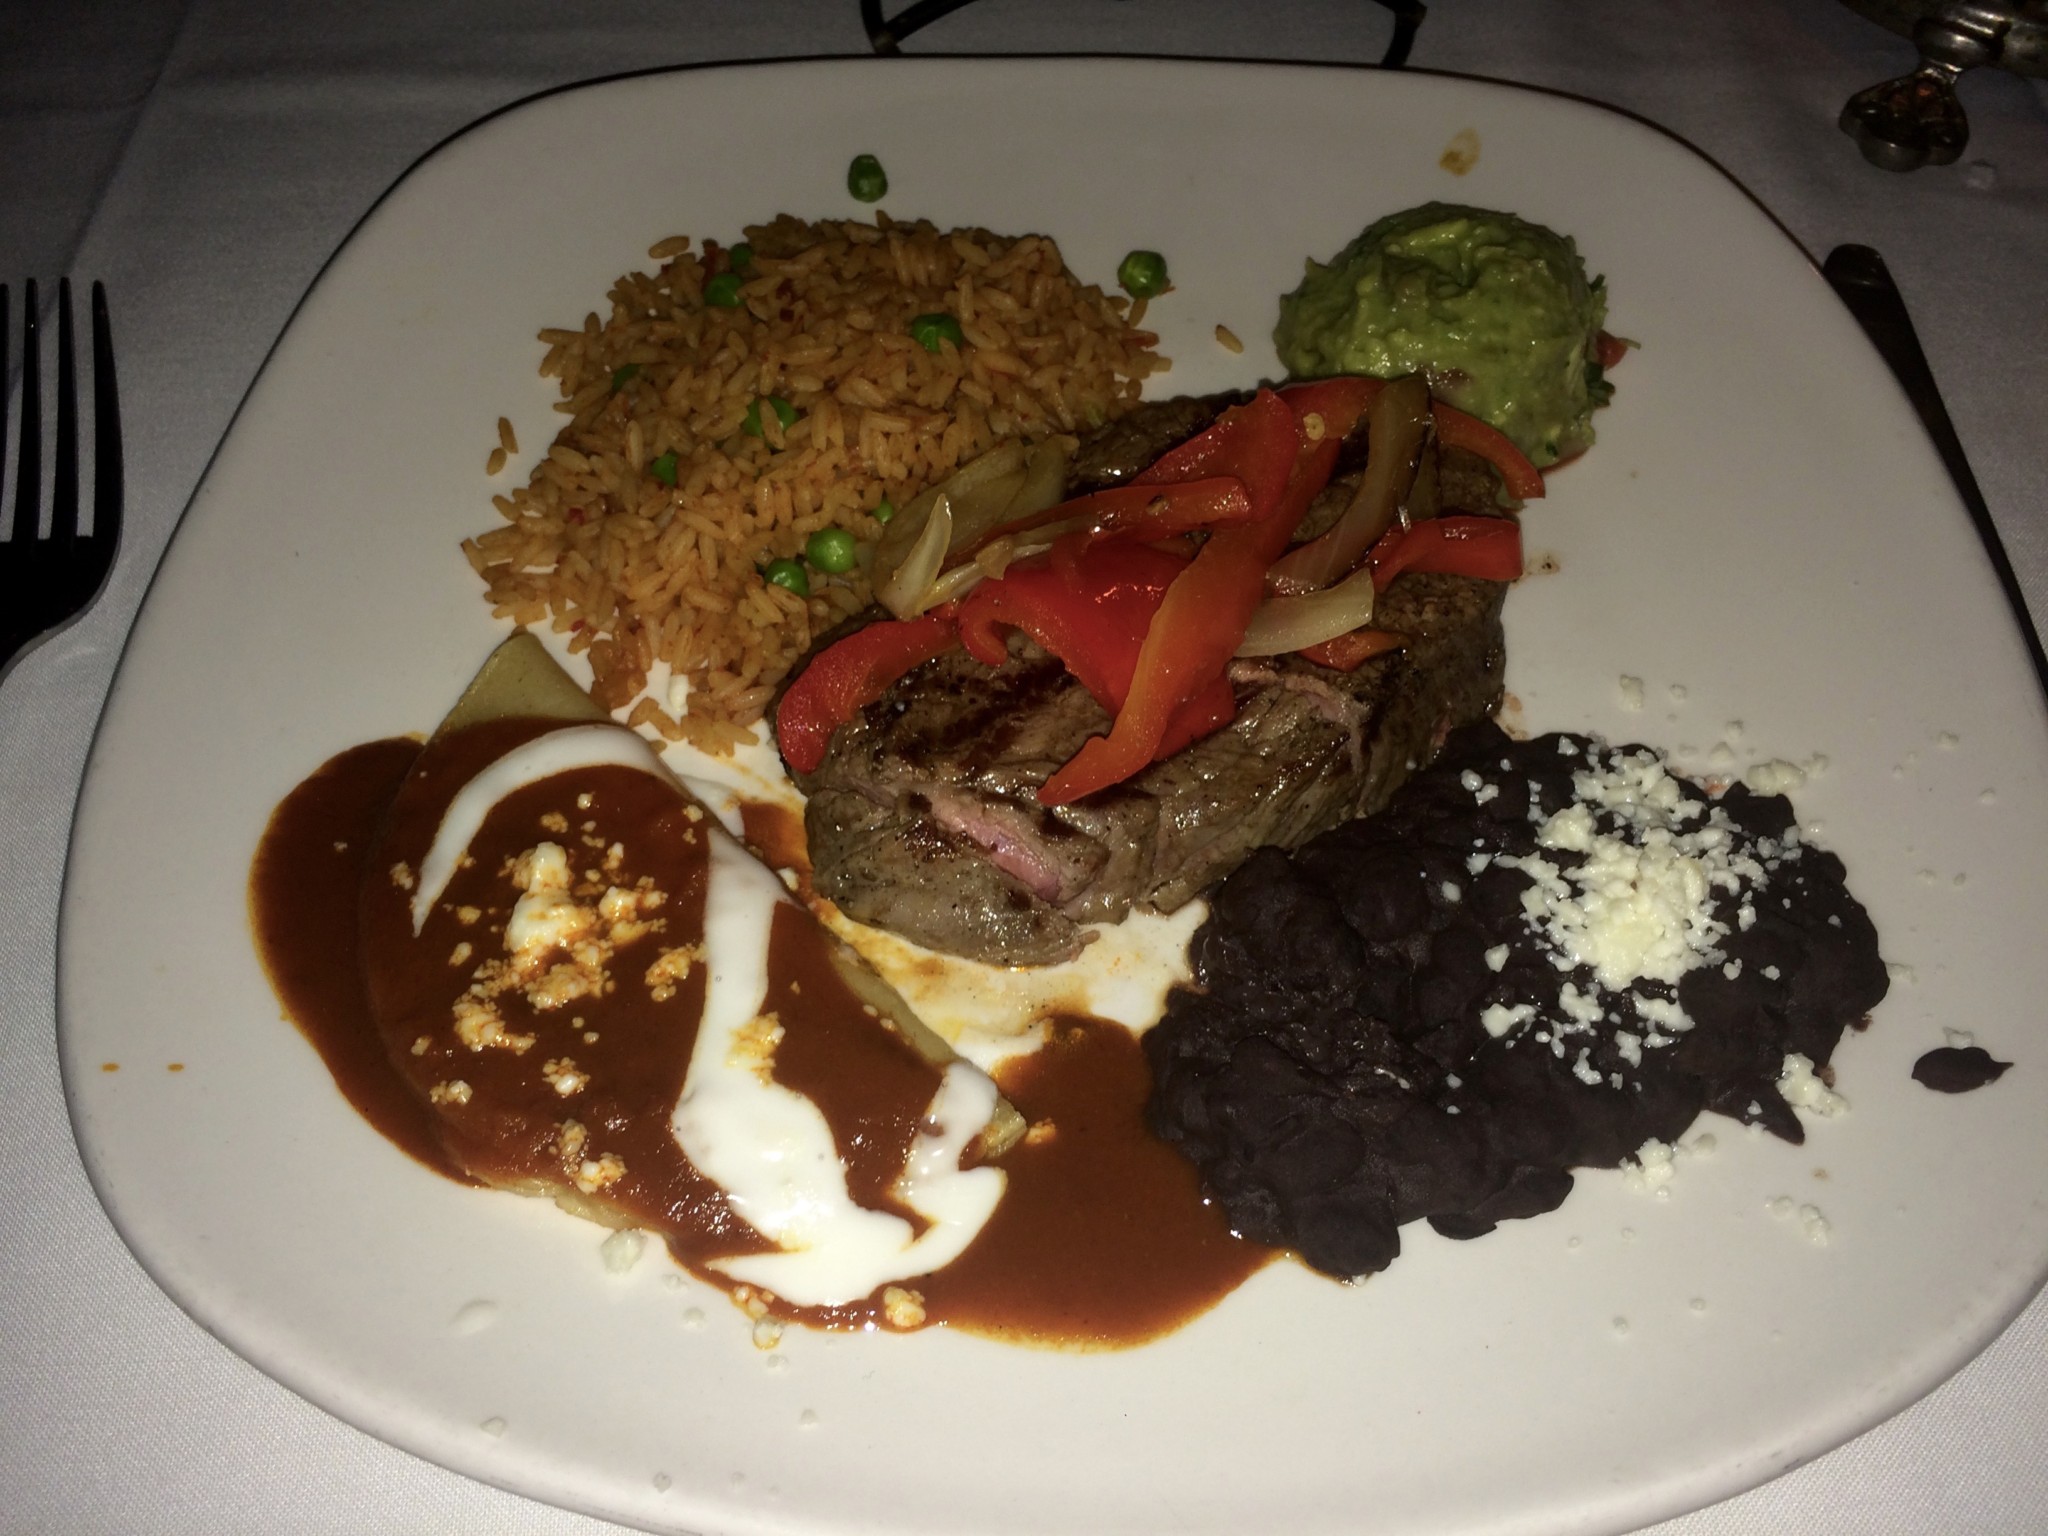 Dinner in Mexico